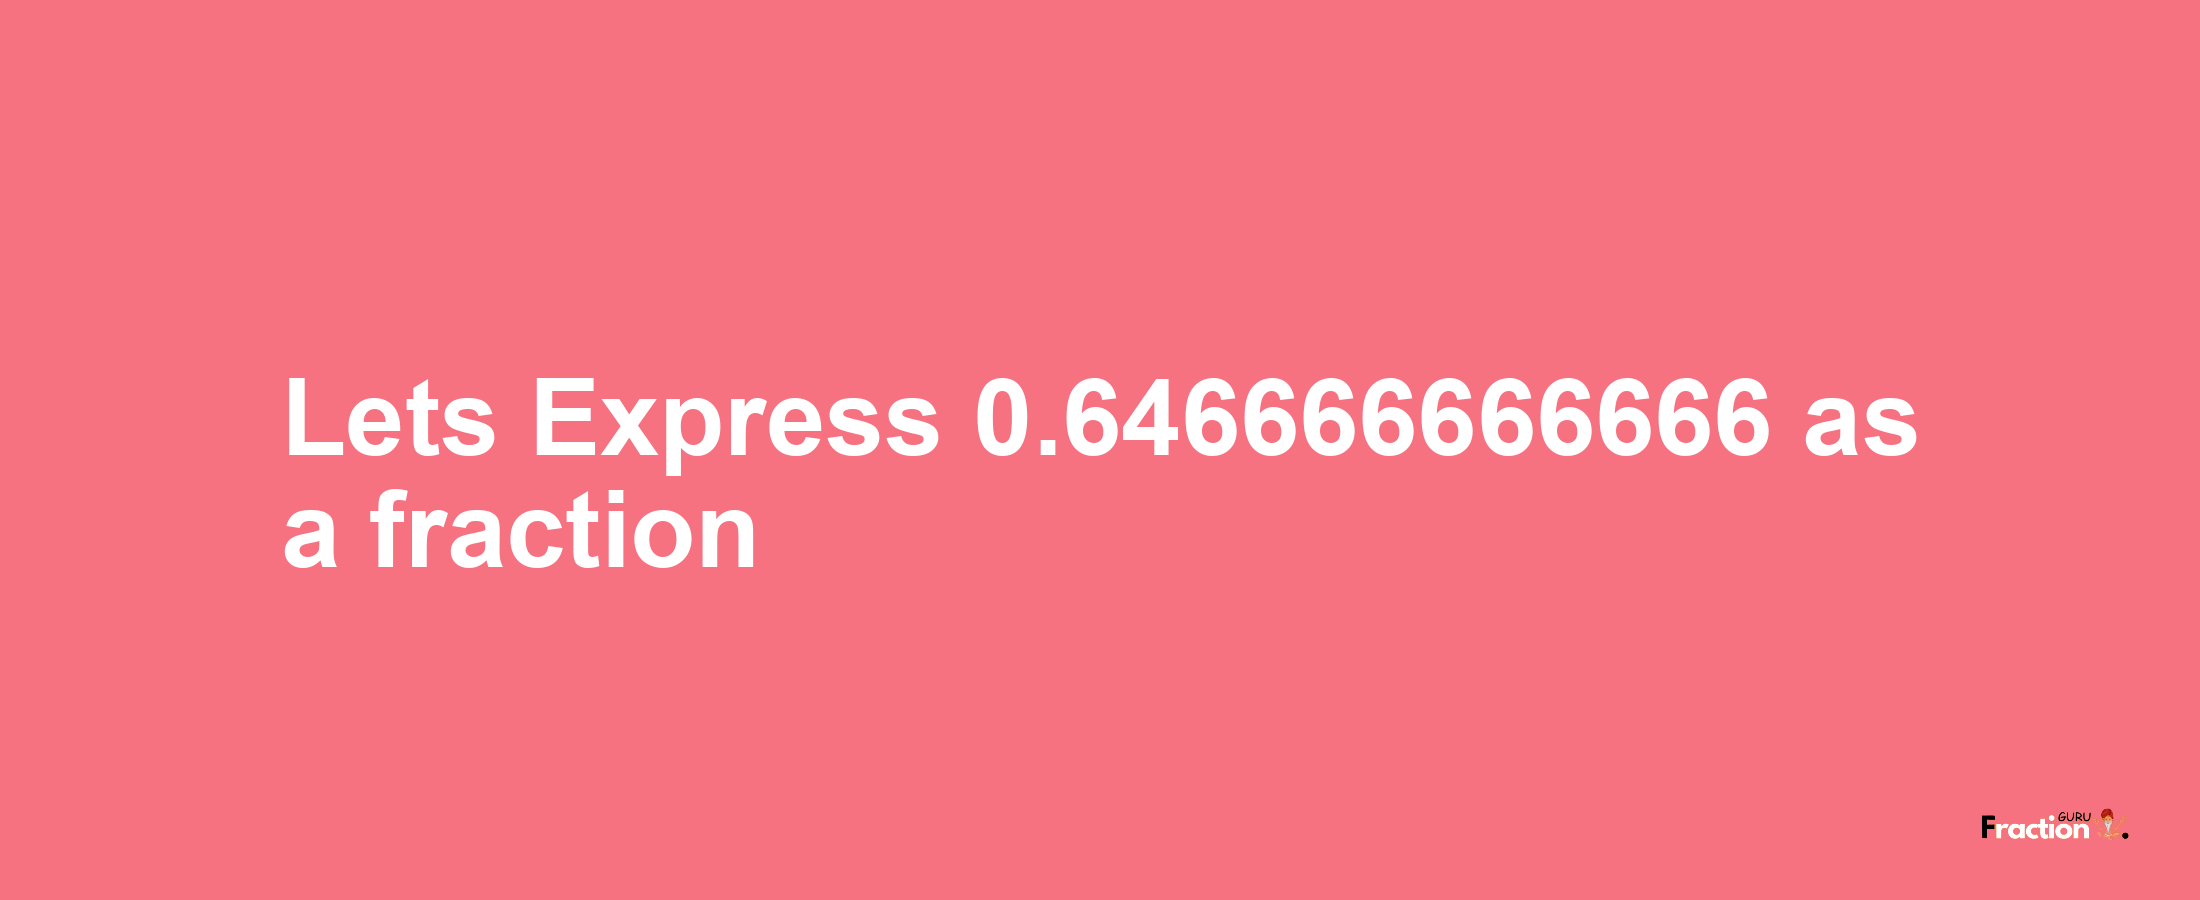 Lets Express 0.646666666666 as afraction